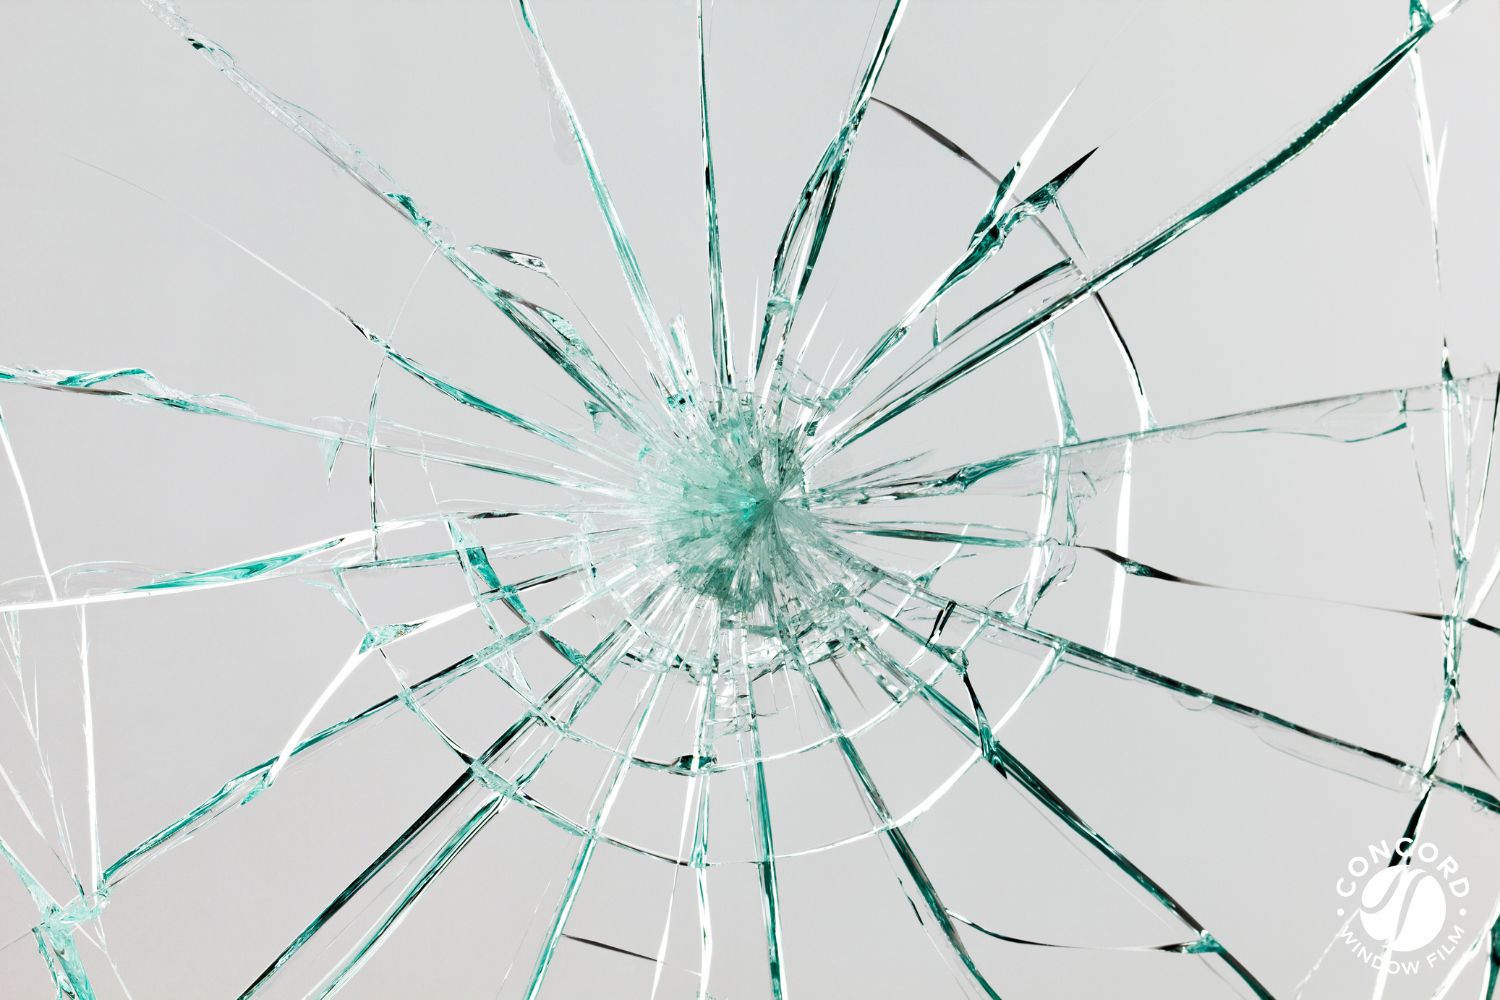 Photo of a broken glass window for a post on safety window film.